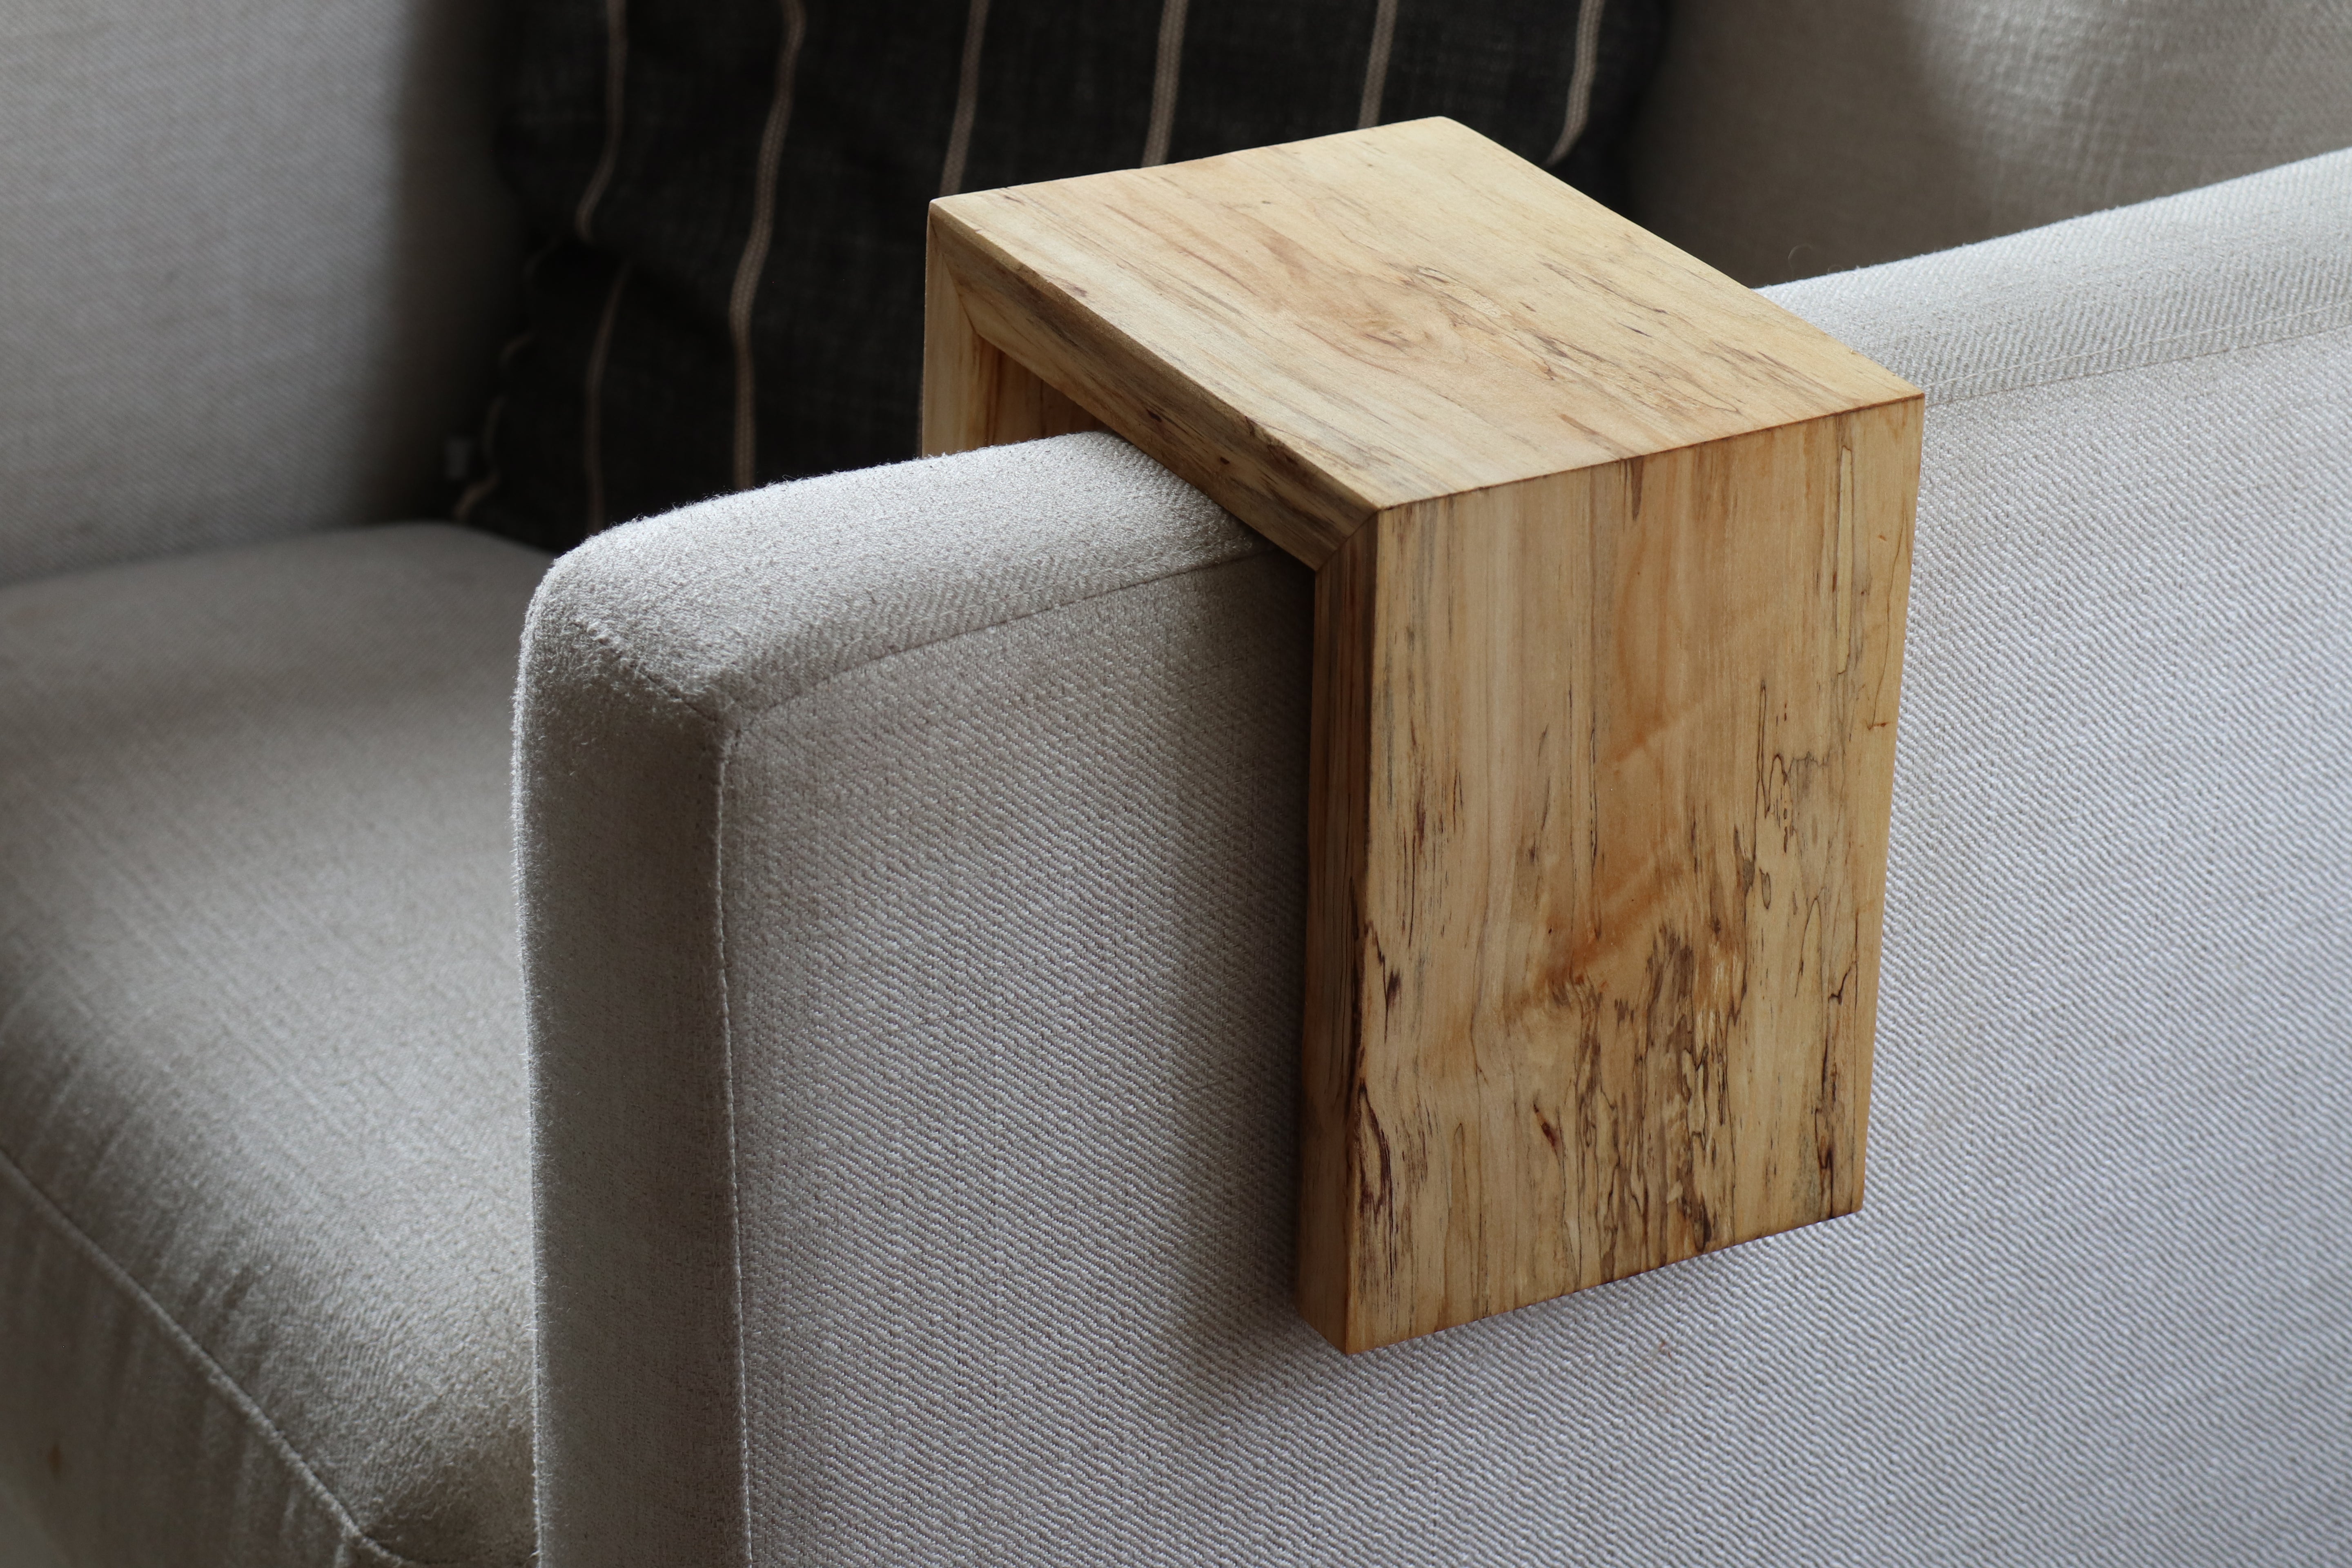 6&quot; Spalted Maple Wood Armrest Table, Coffee Table, Living Room Table (in stock) 